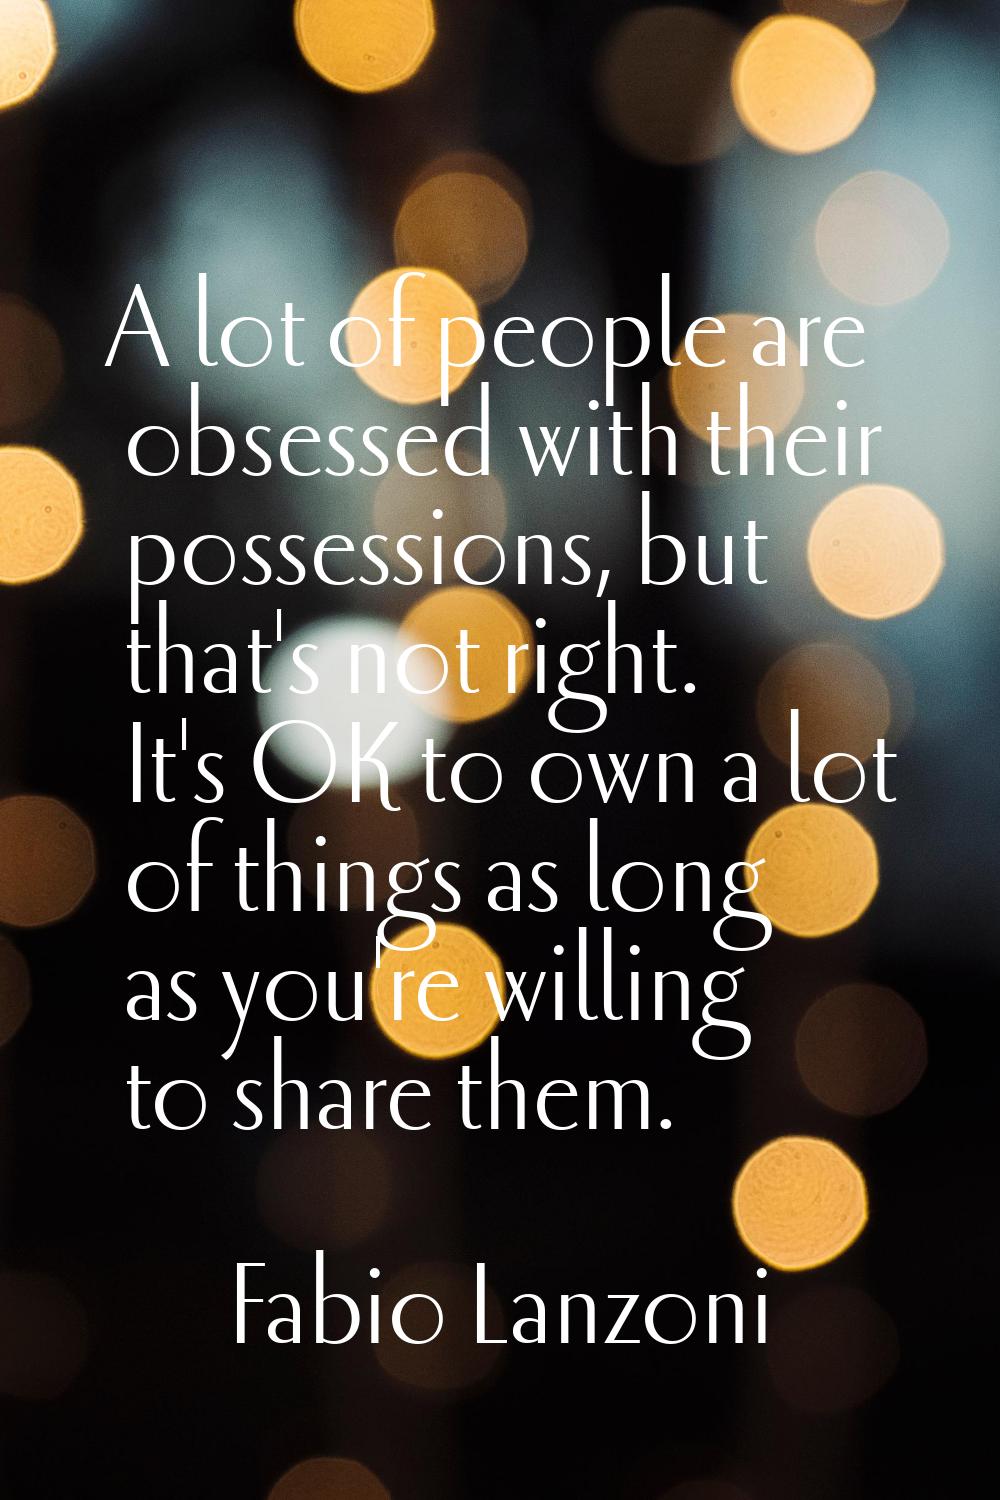 A lot of people are obsessed with their possessions, but that's not right. It's OK to own a lot of 